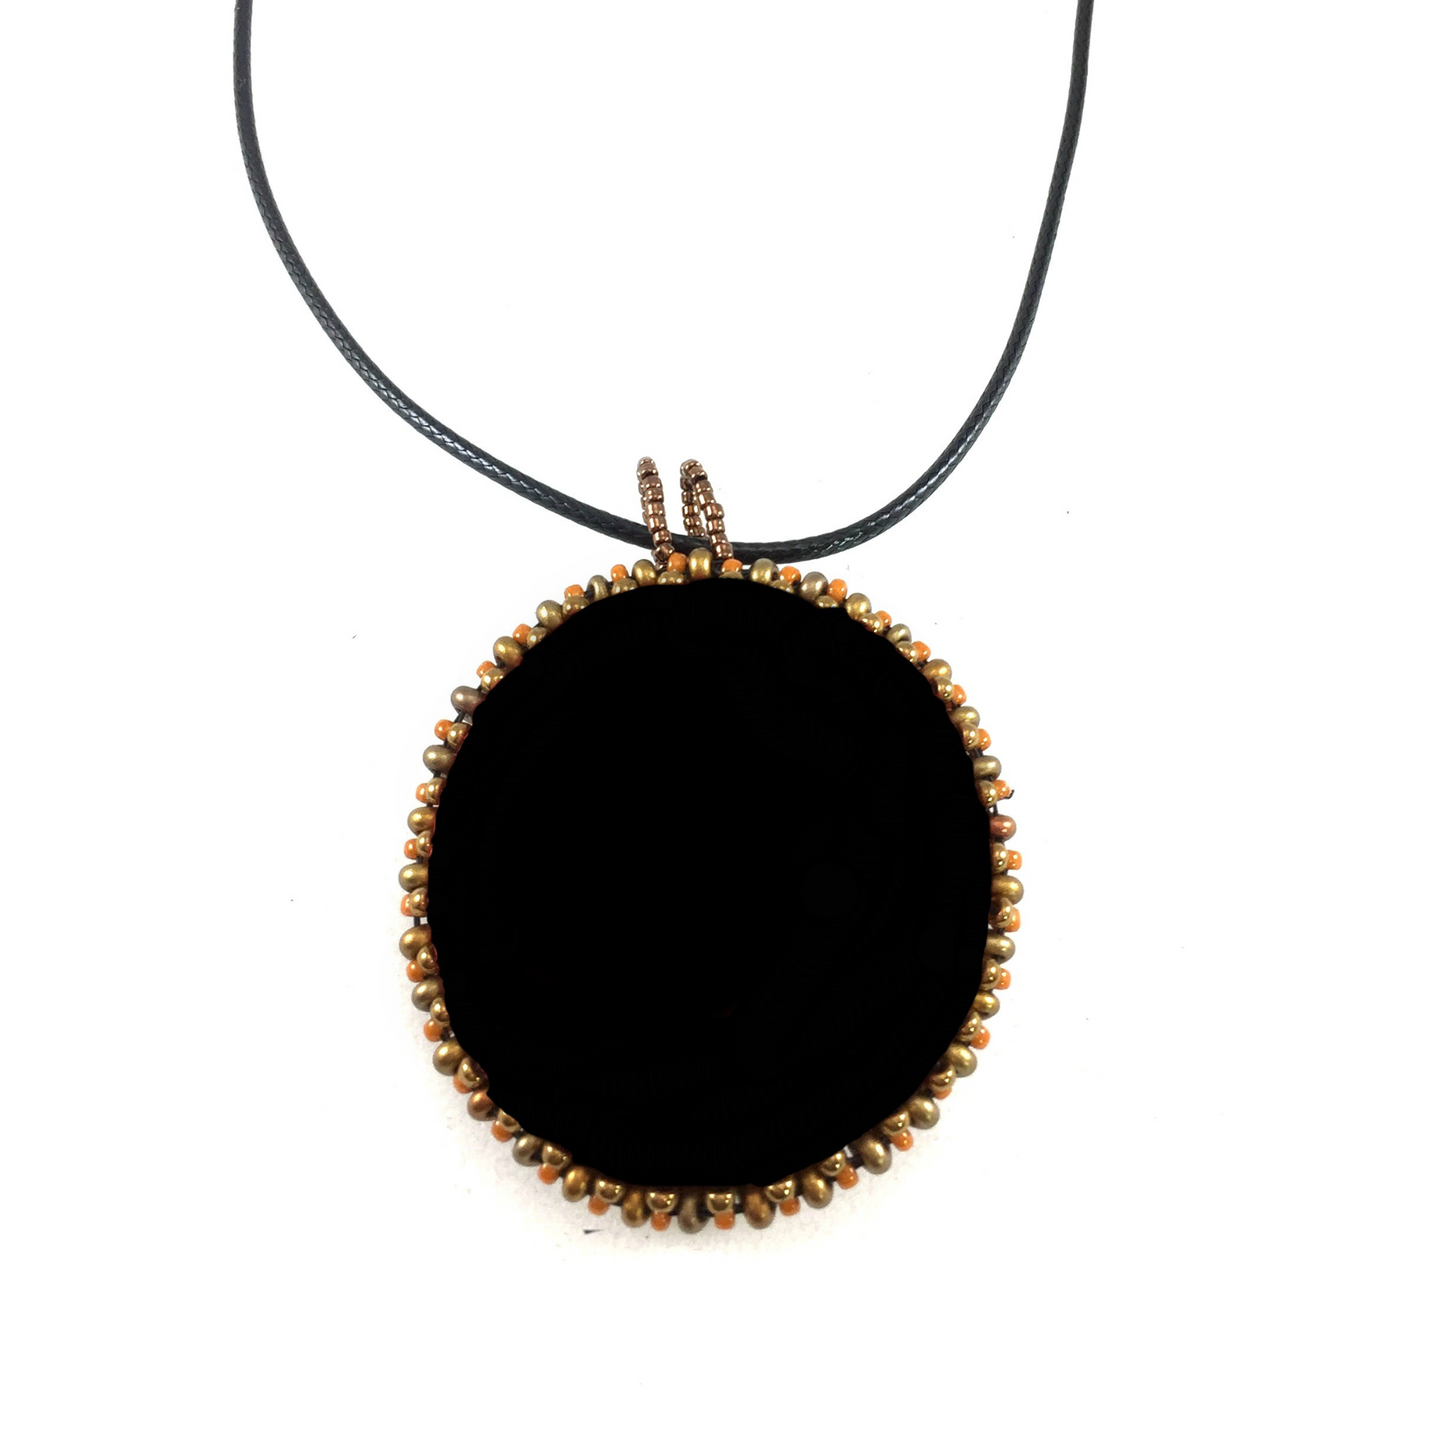 Back of Sun Necklace. Black faux suede and beaded edge of Pendant.